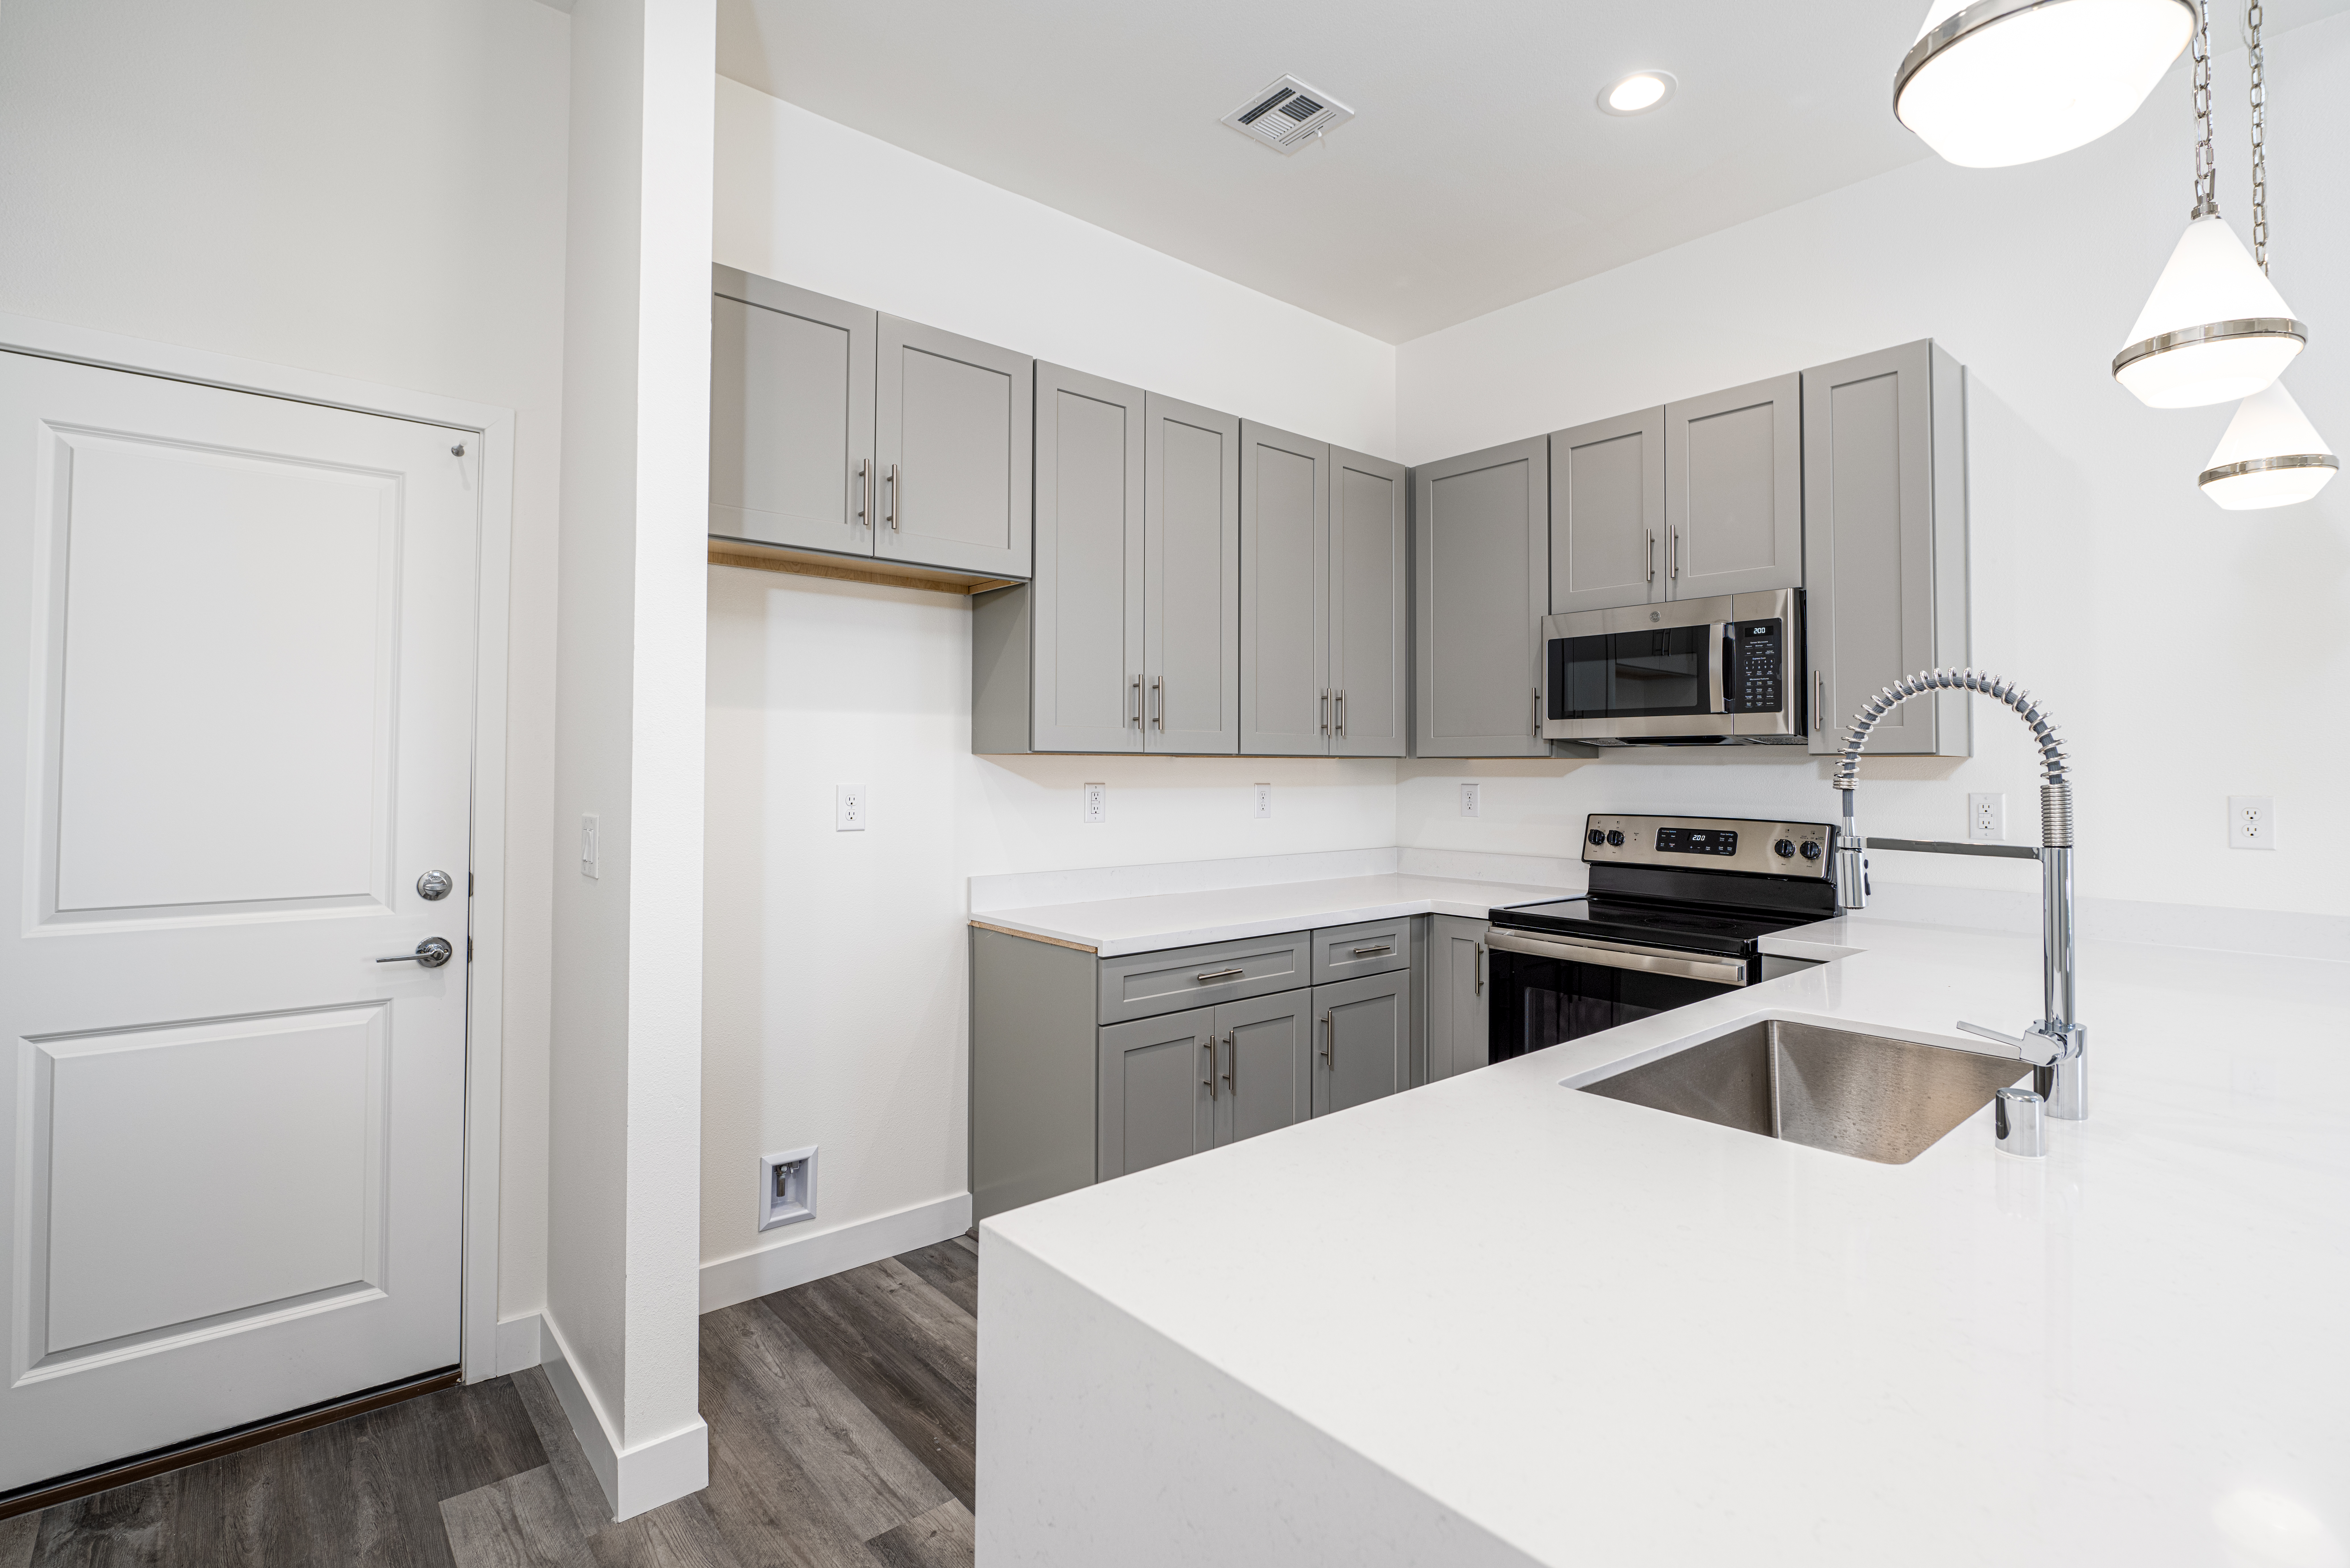 Kitchen of Unit A at Thrive by Edward Homes